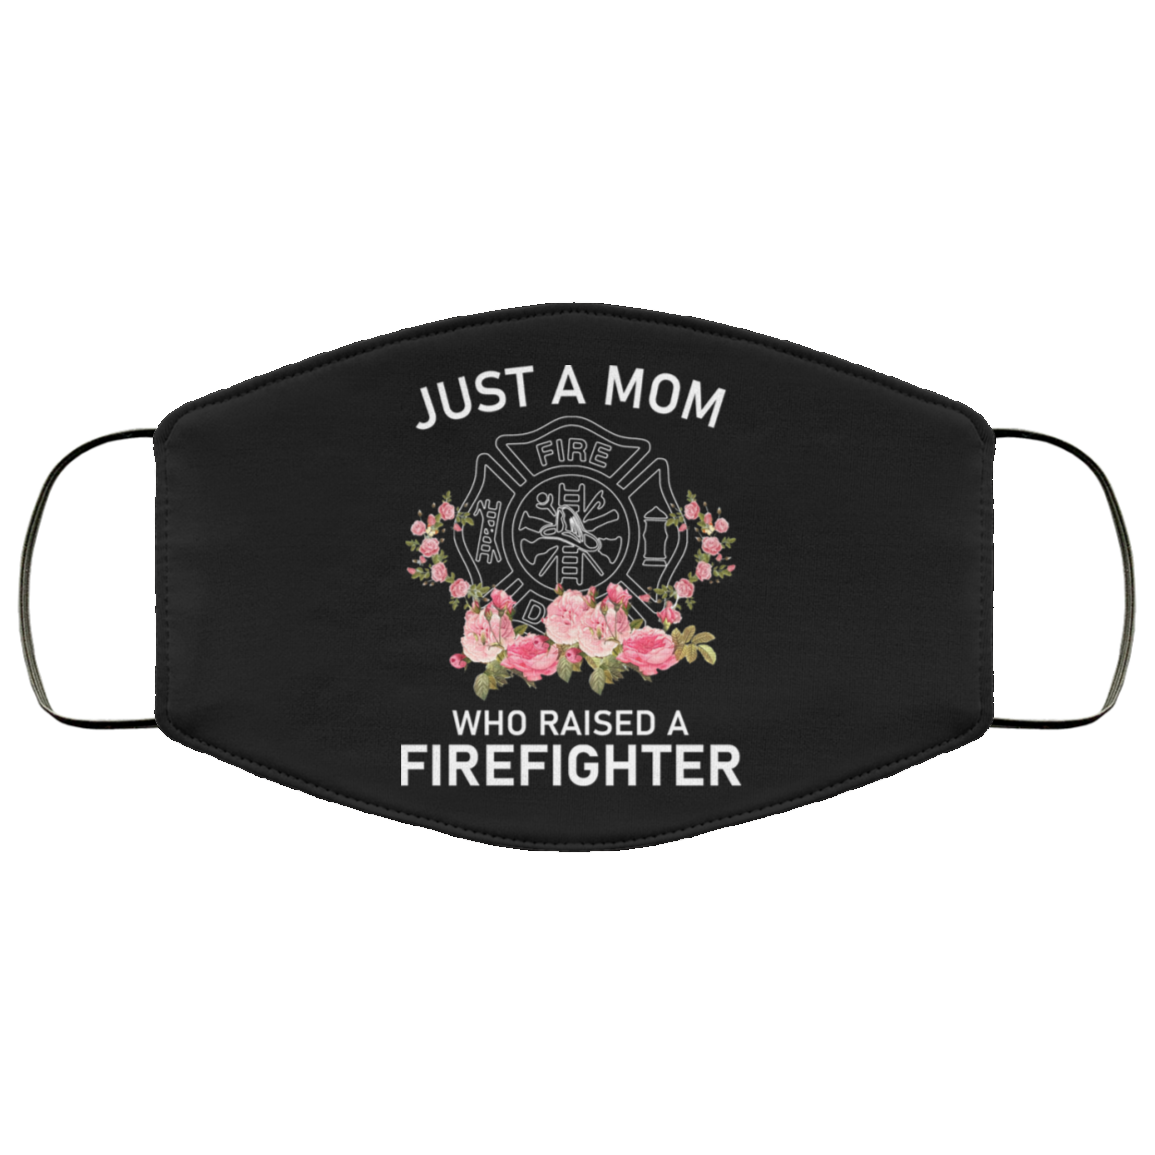 Just A Mom Who Raised A Firefighter Face Mask